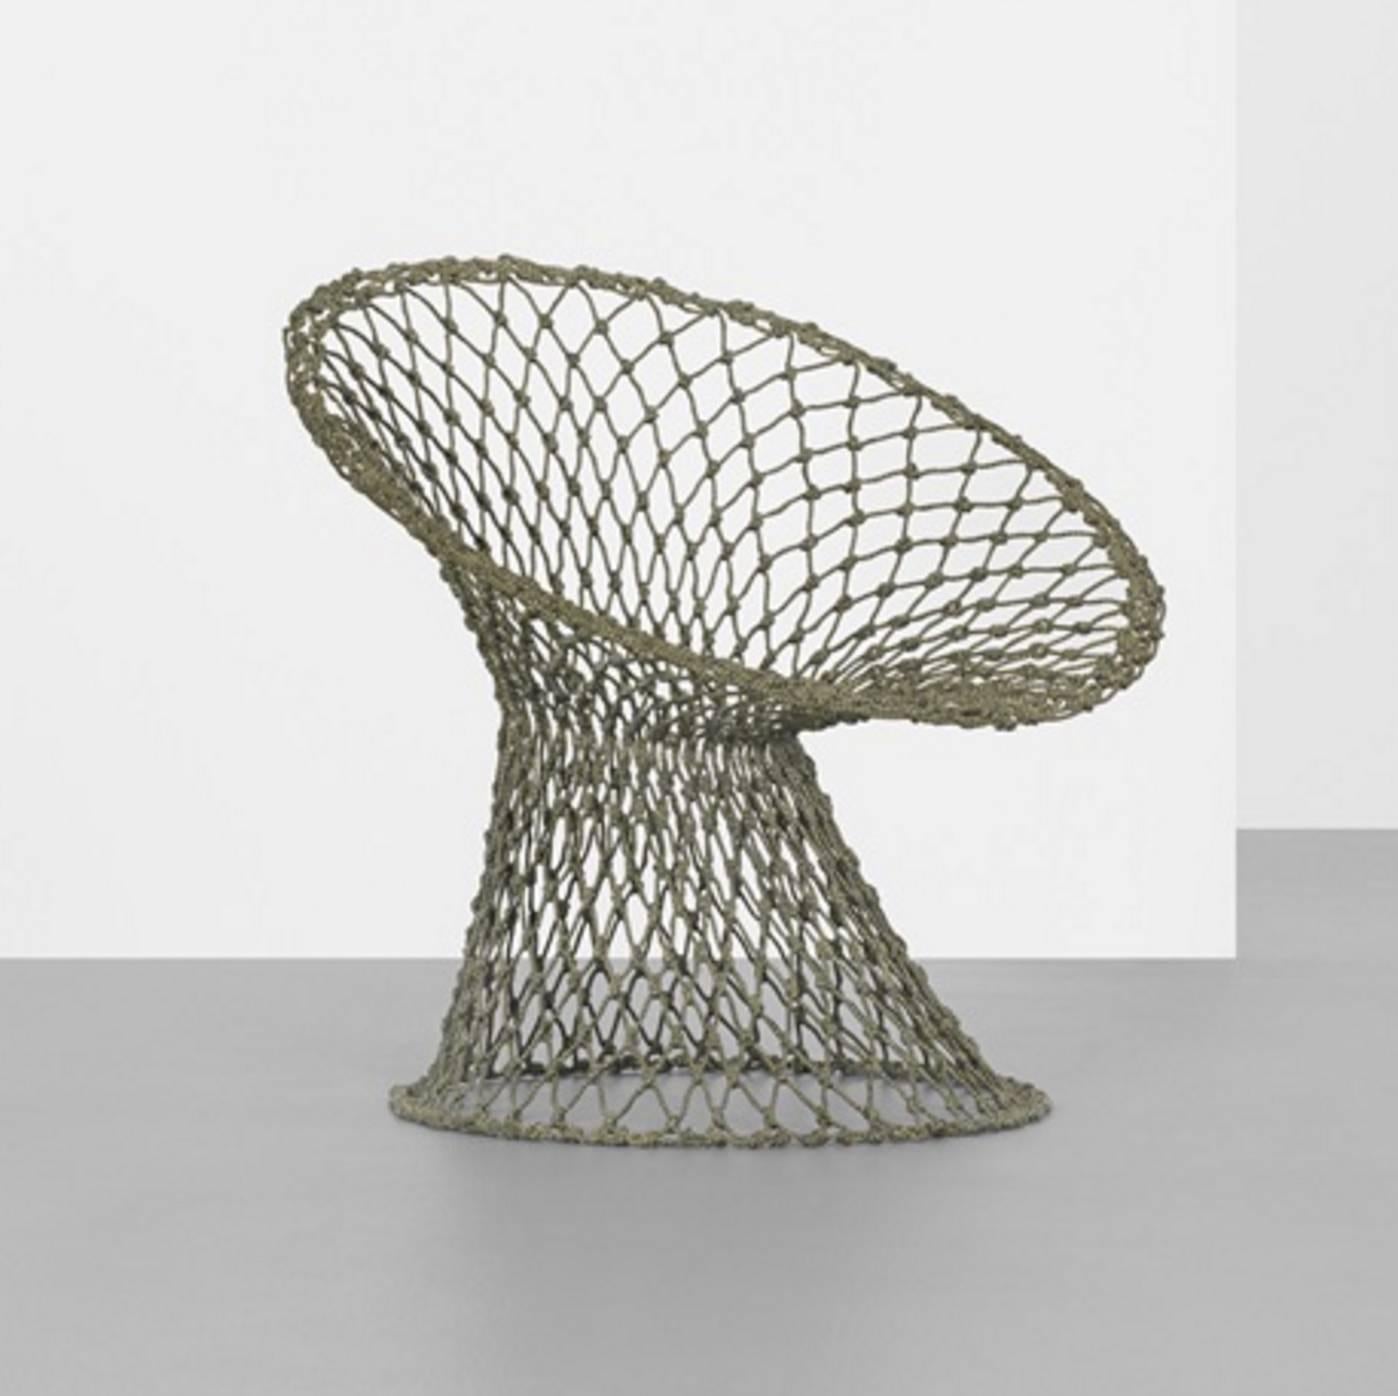 The fishnet chair is an extension of the transparent and functional qualities of Wanders knotted chair design. 

Made of hand-knotted rope by the artist himself, fewer than ten examples of this form were produced.

Provenance: Collection Marcel